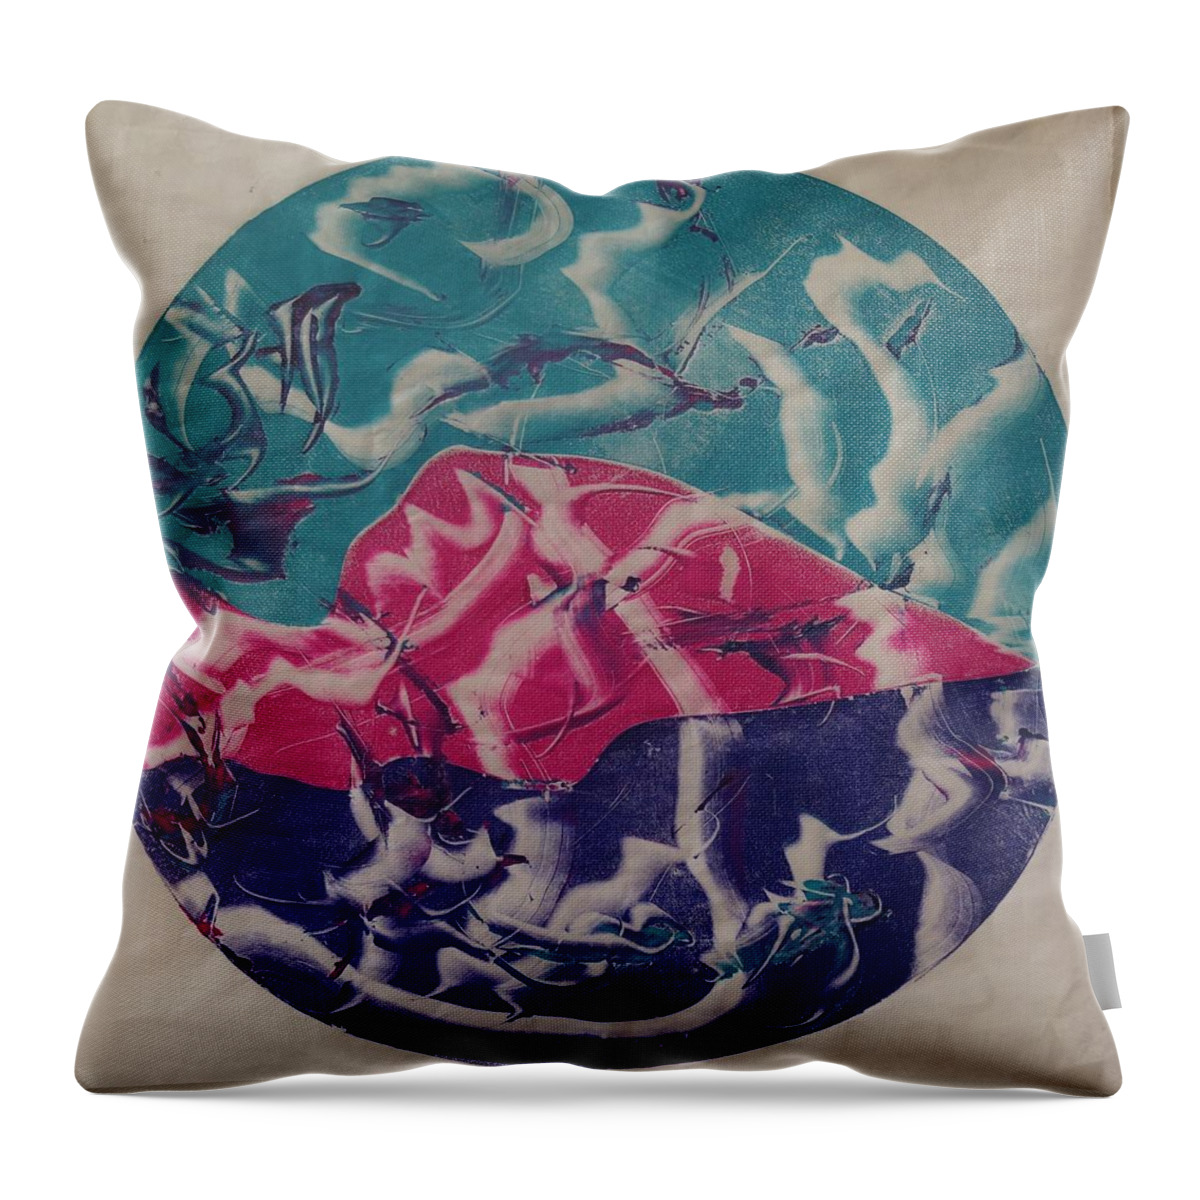 Abstract Throw Pillow featuring the painting Albers by Erika Jean Chamberlin